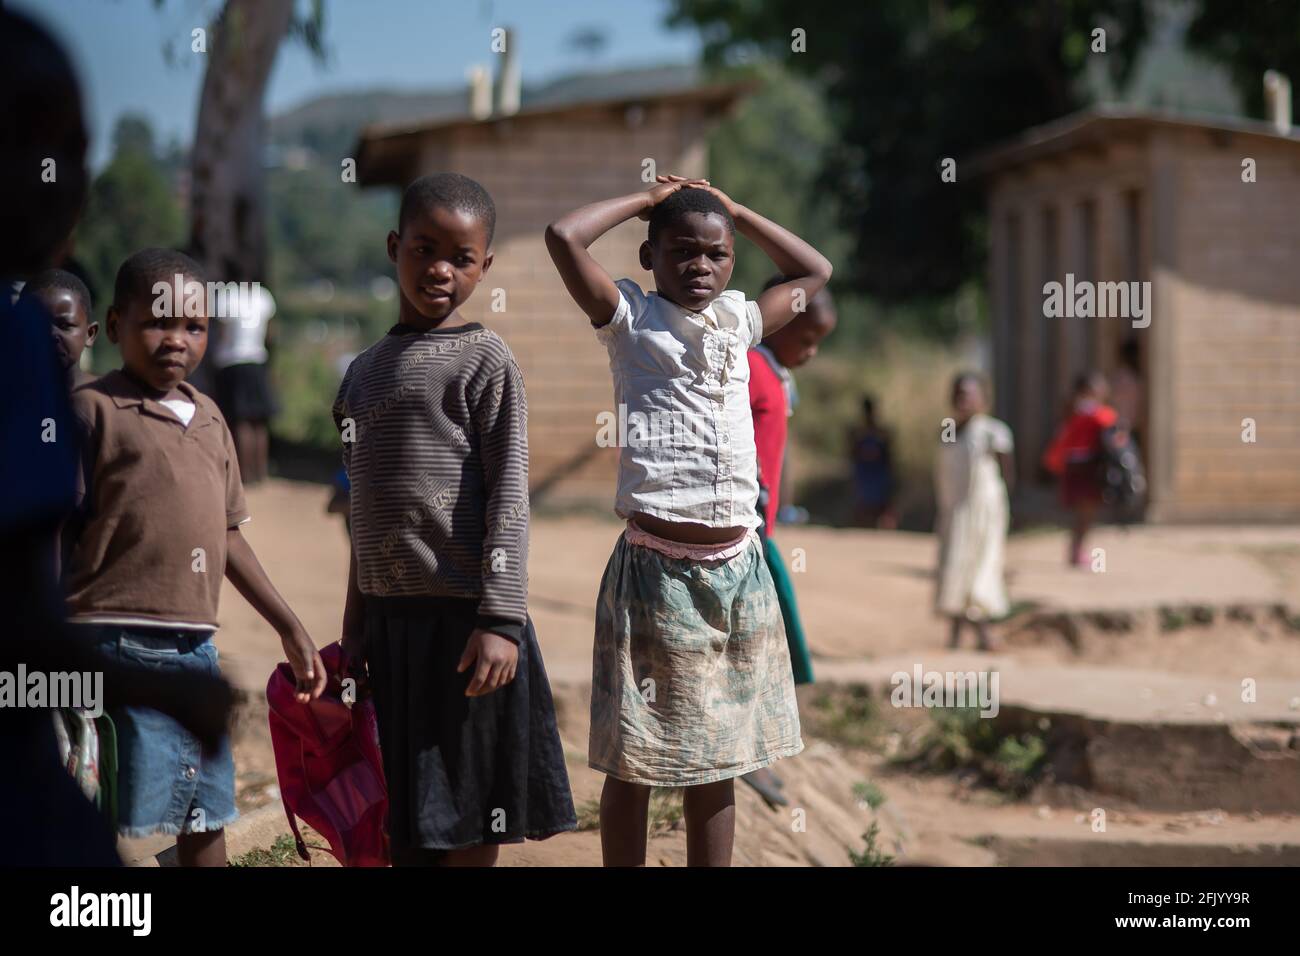 Mzuzu, Malawi. 30-05-2018. Group of black children gather in front of the camera after finishing school in a rural area of Malawi. Stock Photo